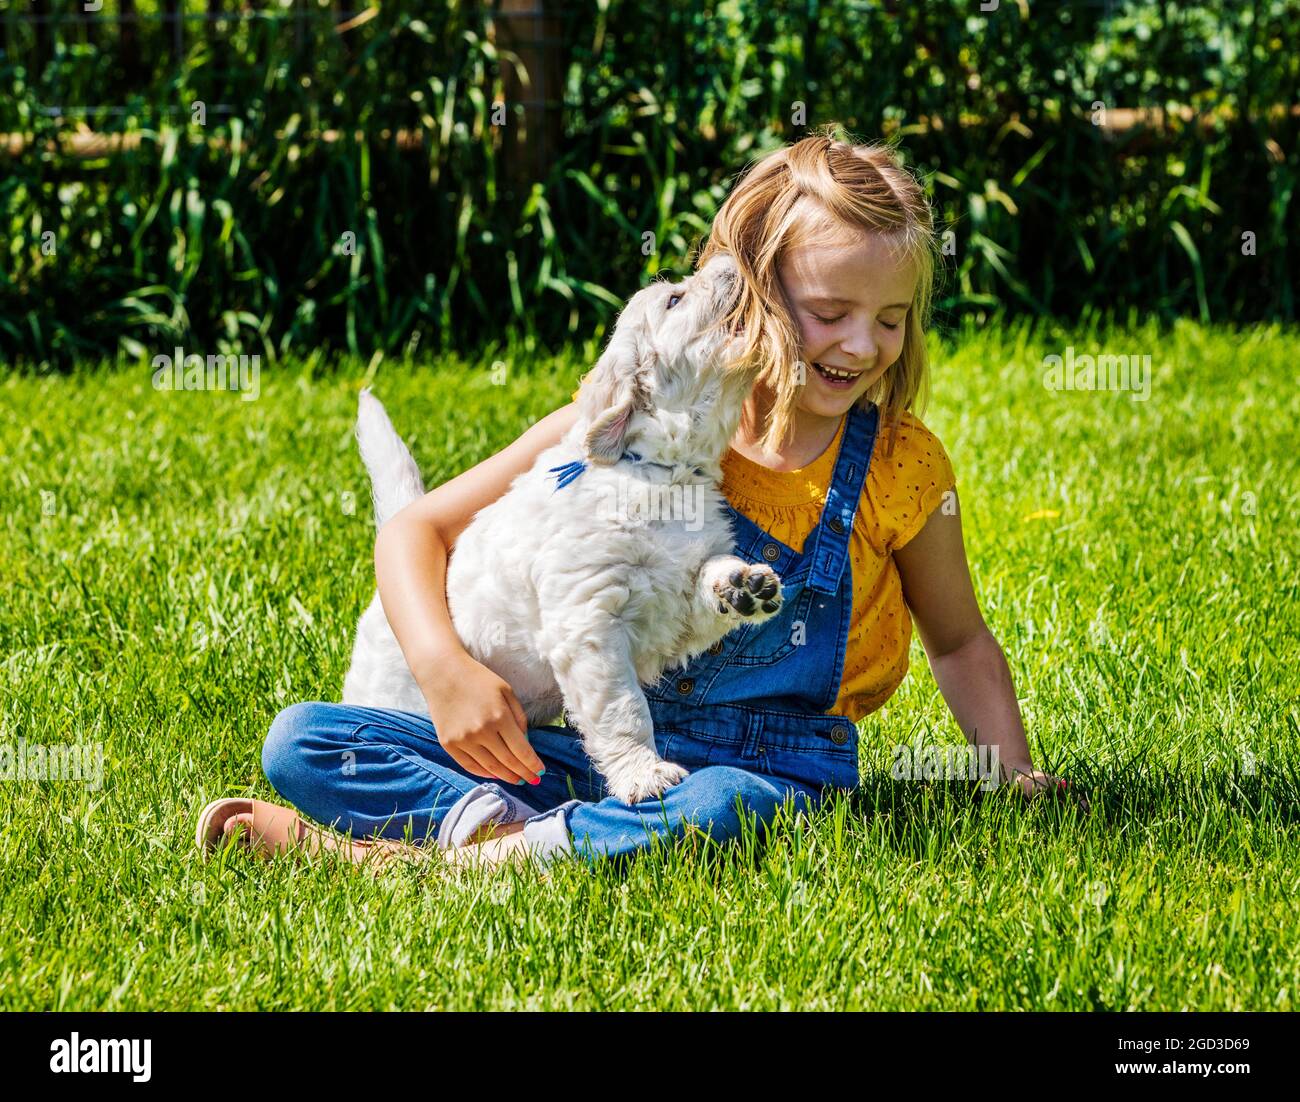 Young girl playing on grass with six week old Platinum, or Cream colored Golden Retriever puppies. Stock Photo